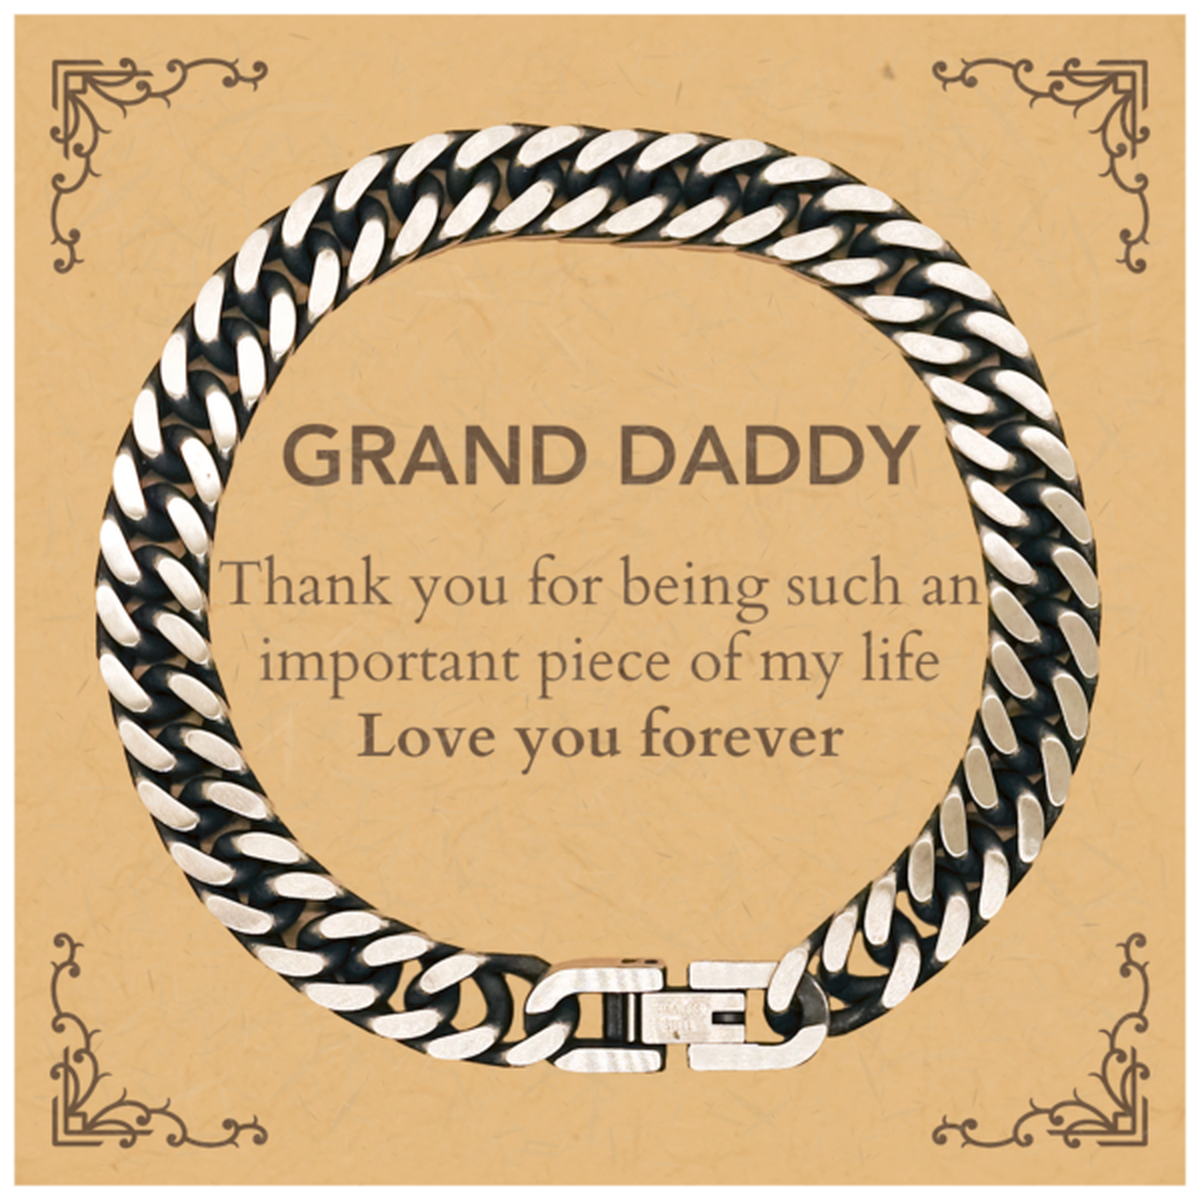 Appropriate Grand Daddy Cuban Link Chain Bracelet Epic Birthday Gifts for Grand Daddy Thank you for being such an important piece of my life Grand Daddy Christmas Mothers Fathers Day